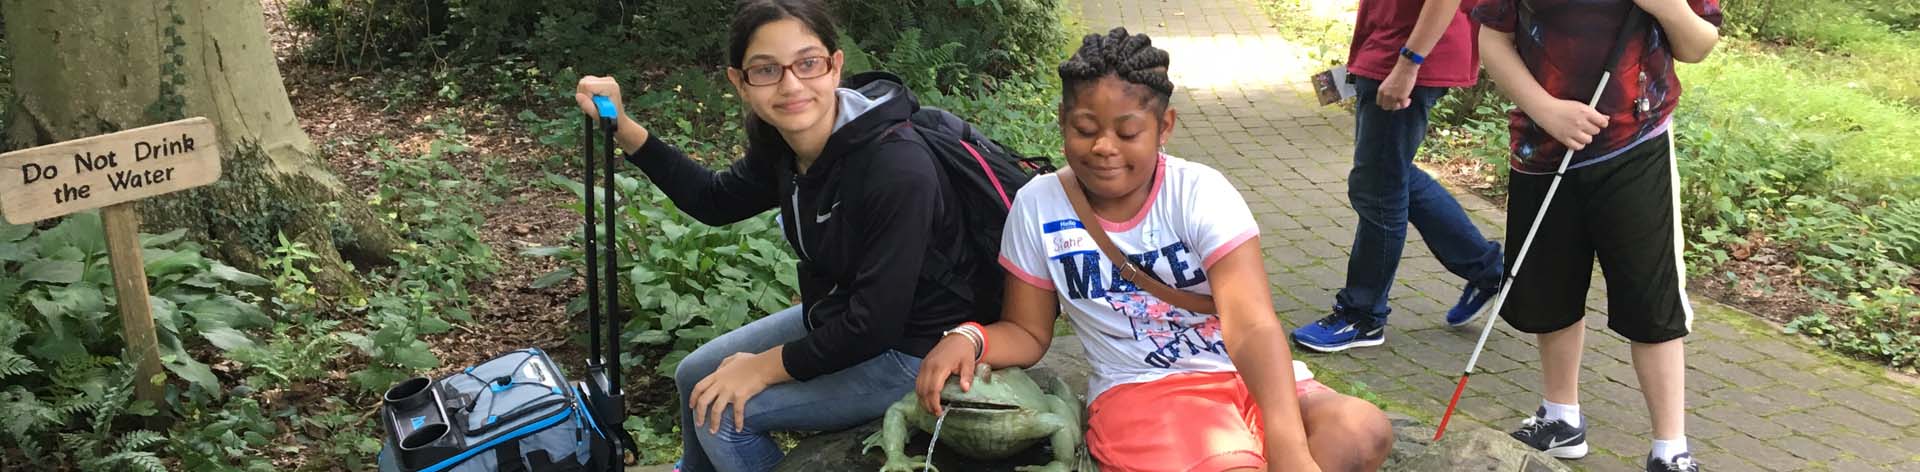 Two NFBDE BELL participants smiling together at a nature center. One girl has her arm around stone frog that is part of a fountain.